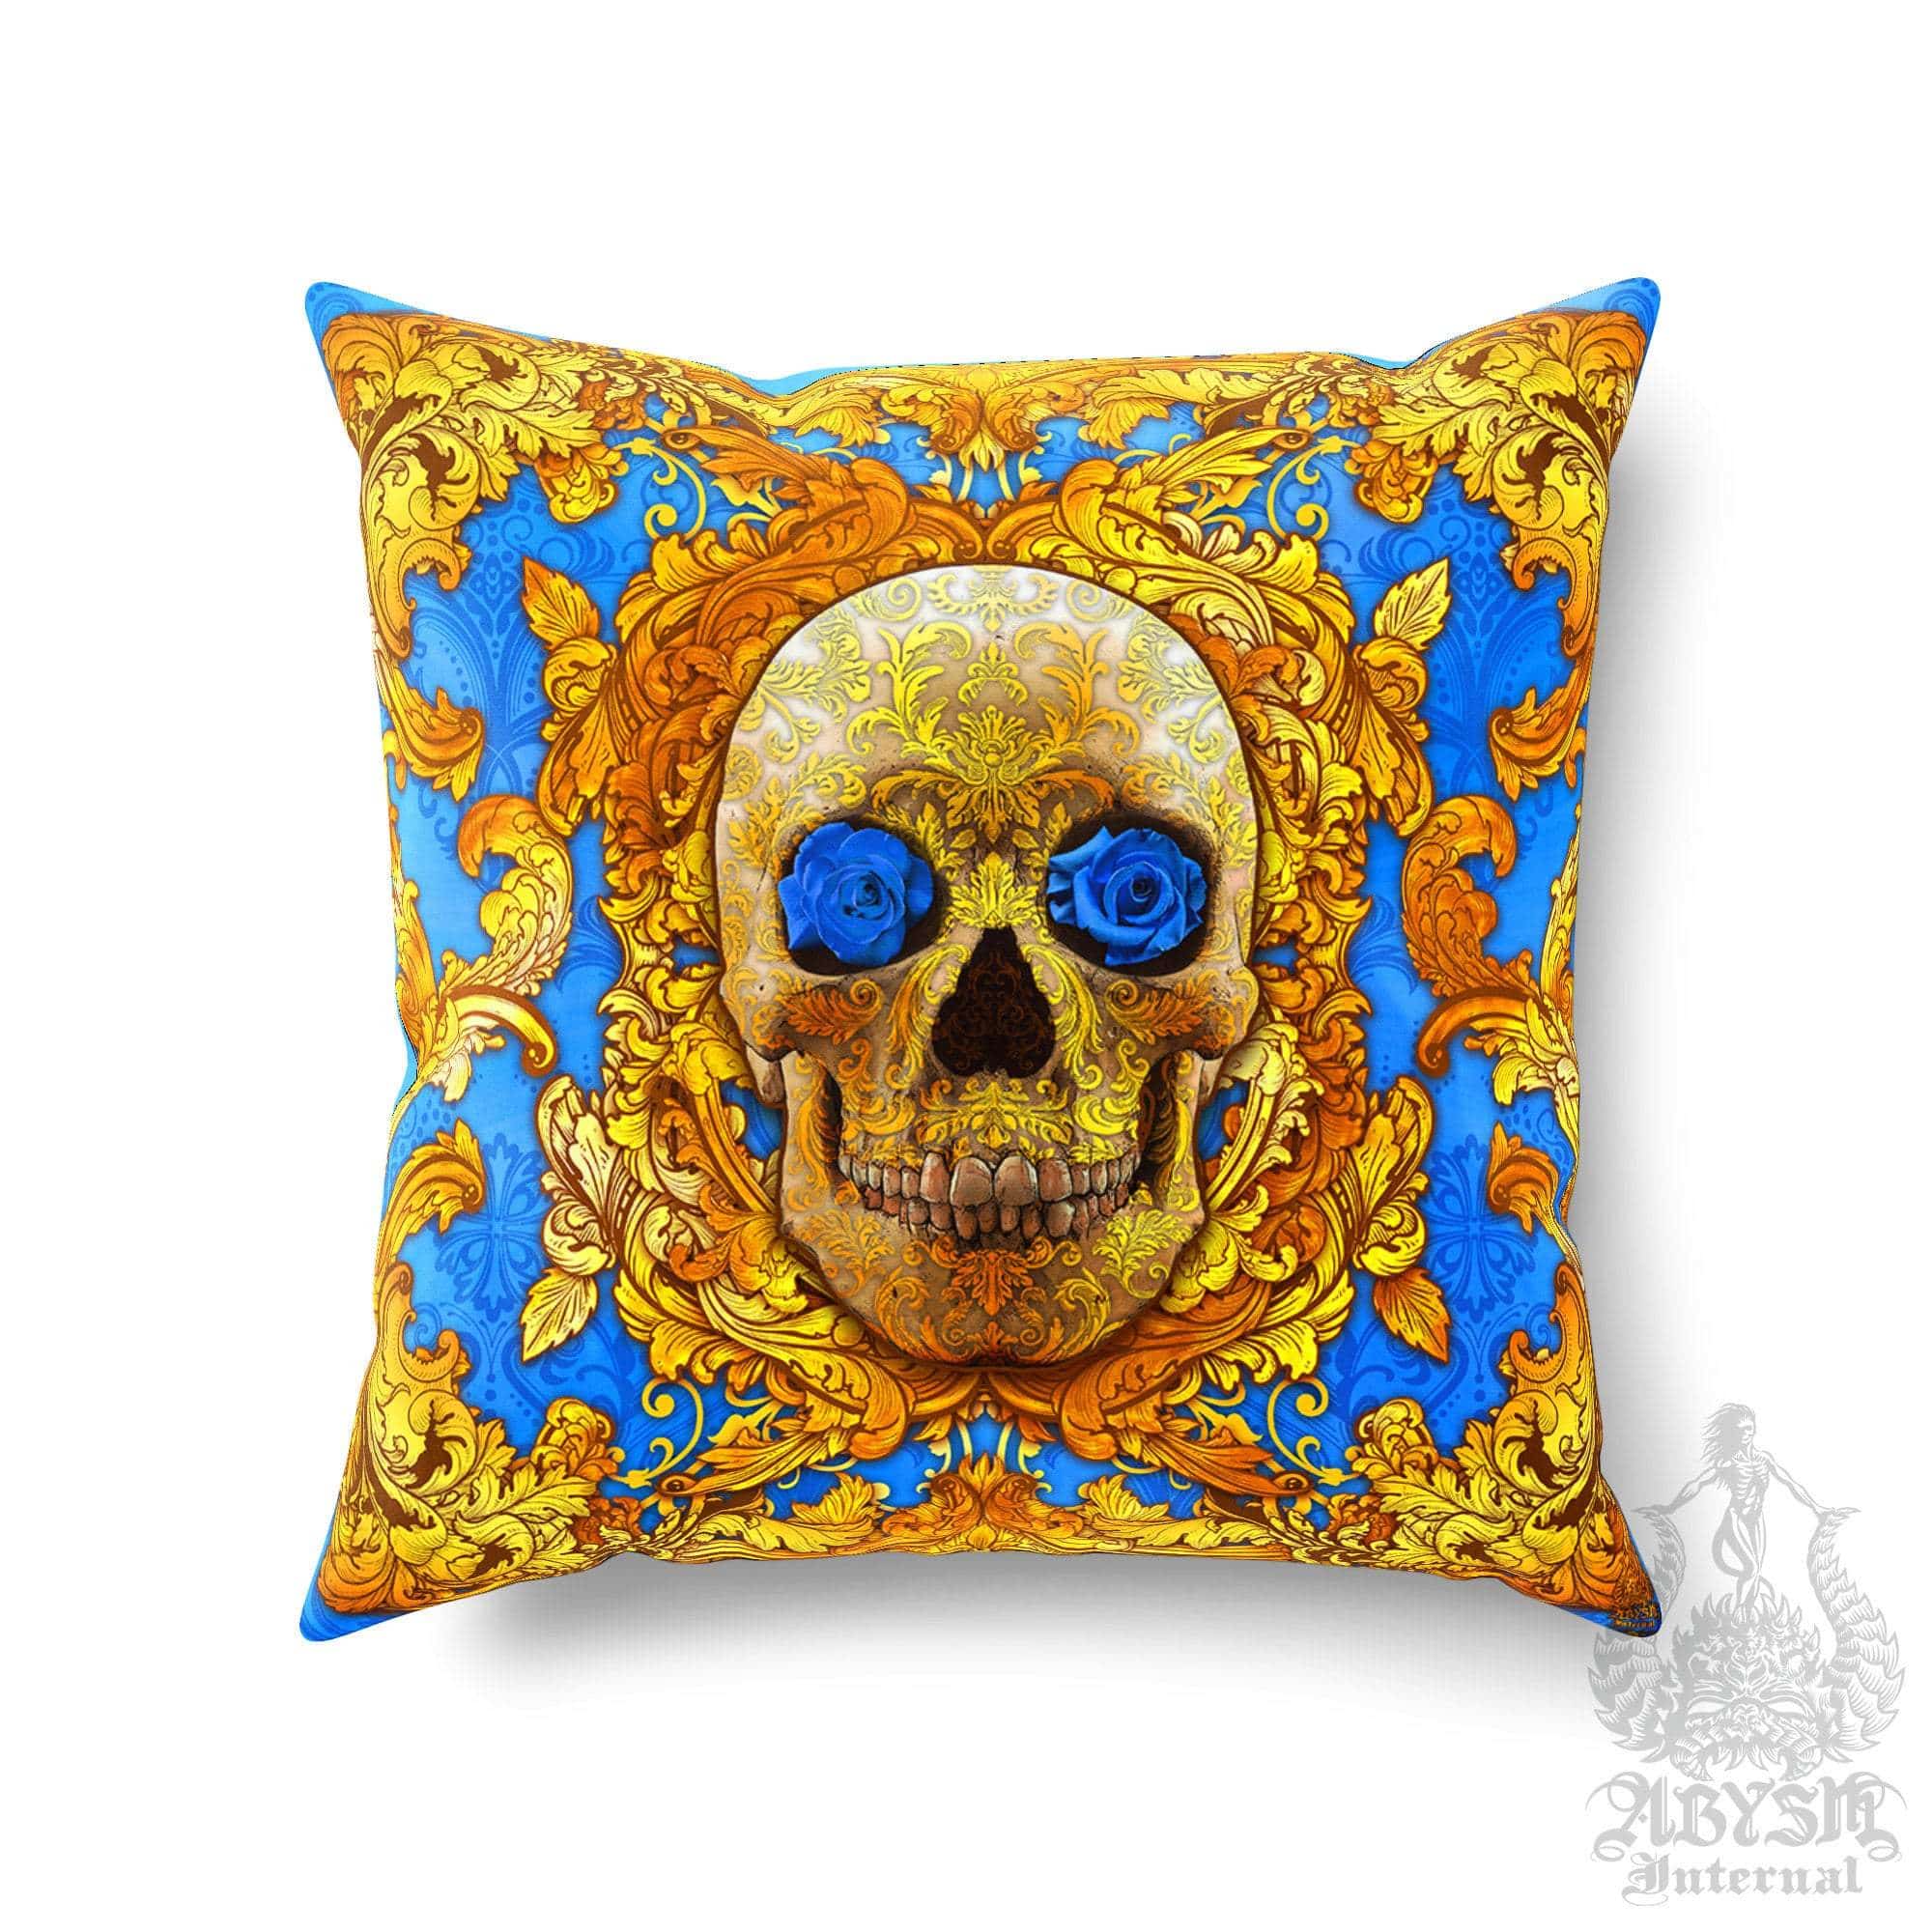 Skull Throw Pillow, Decorative Accent Cushion, Vintage, Baroque Decor, Macabre Art, Funky and Eclectic Home - Cyan & Gold - Abysm Internal